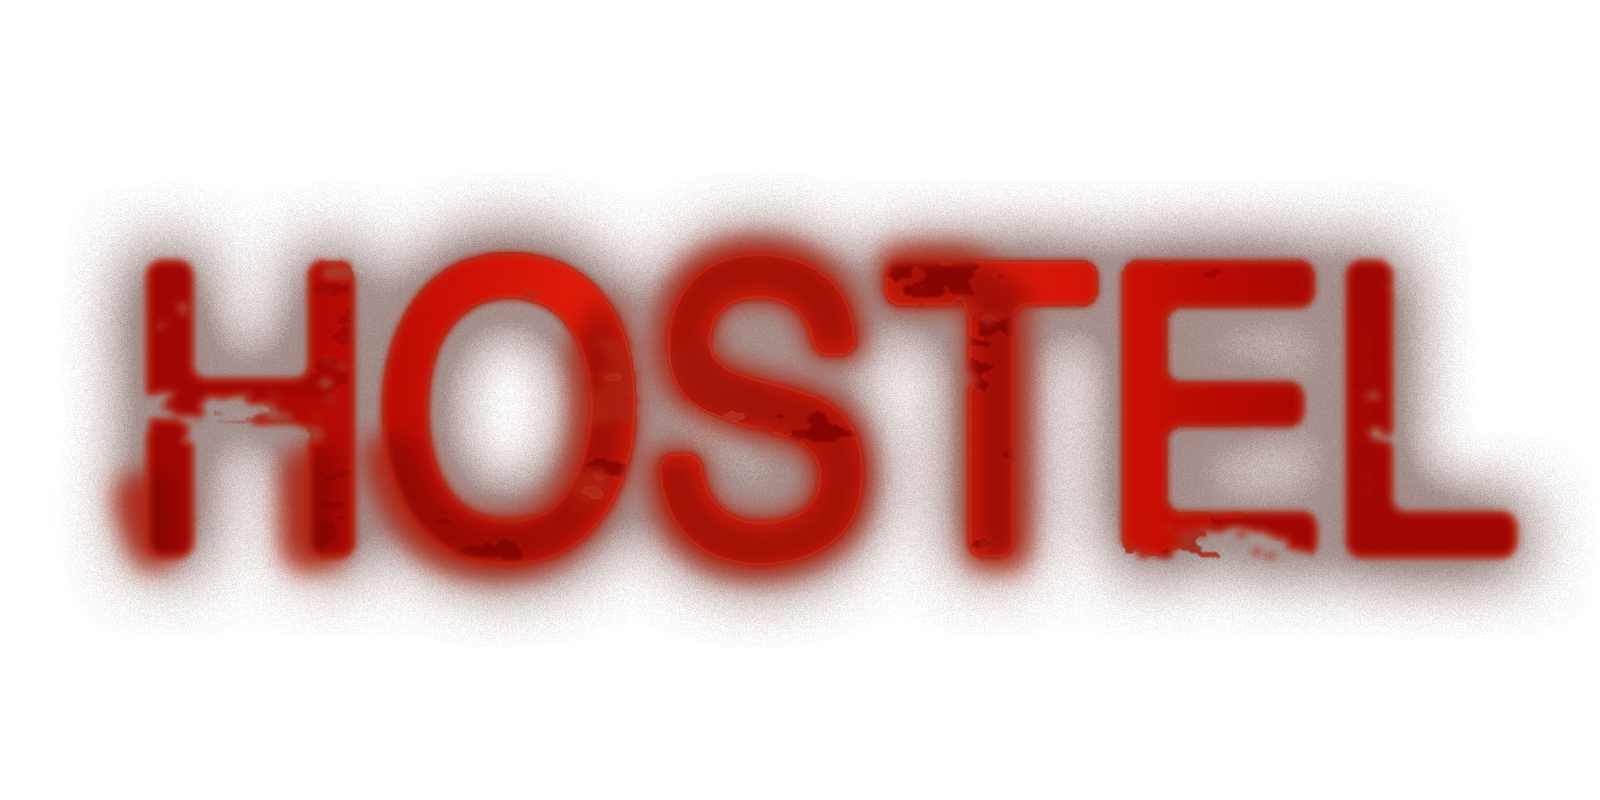 hostel the movie about europe